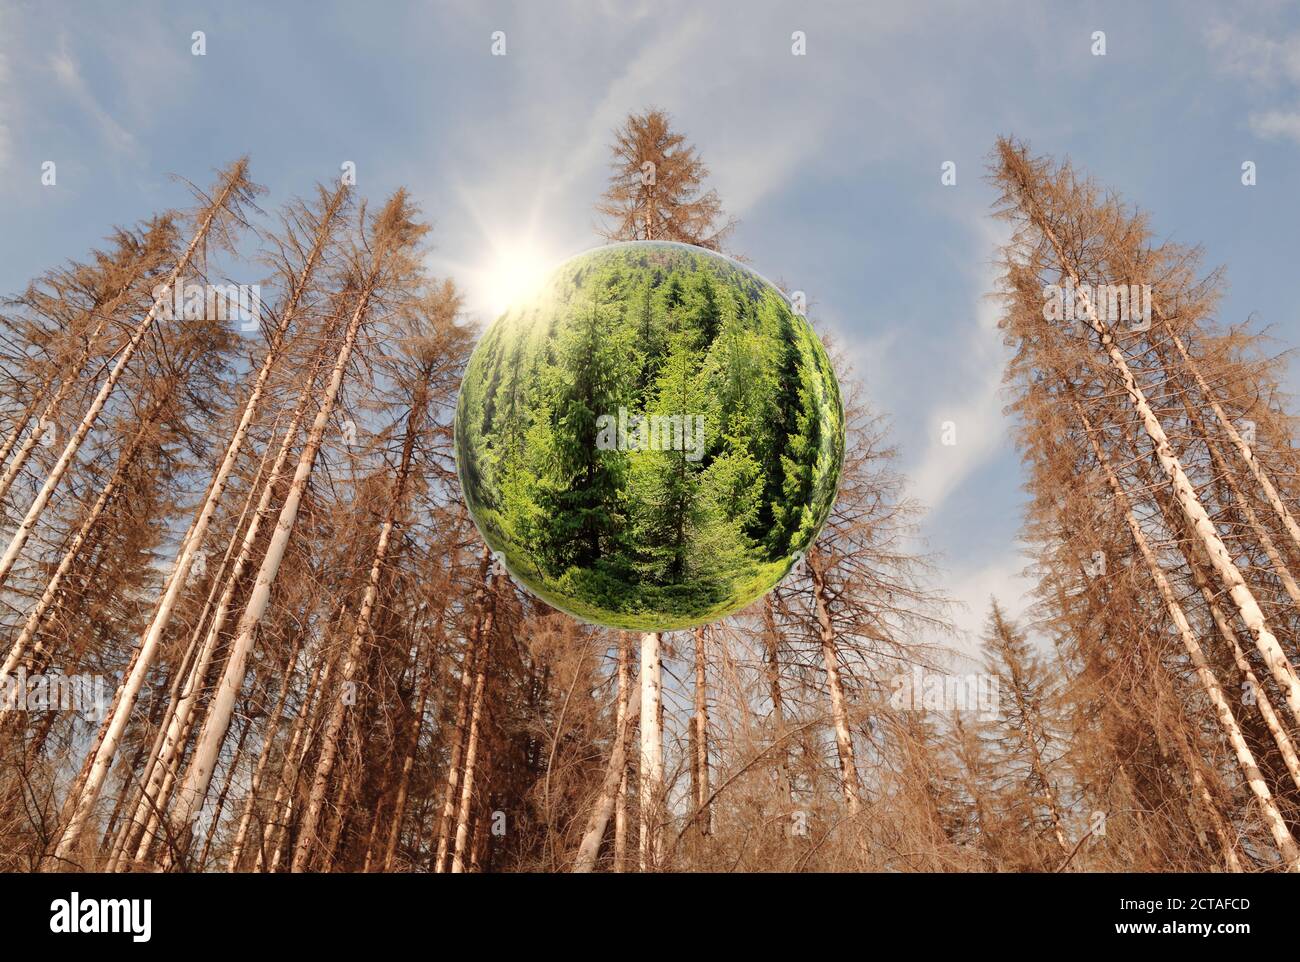 Forest dieback and global warming concept. A healthy green forest inside a glass ball, surrounded by dead trees due to drought and bark beetle. Stock Photo